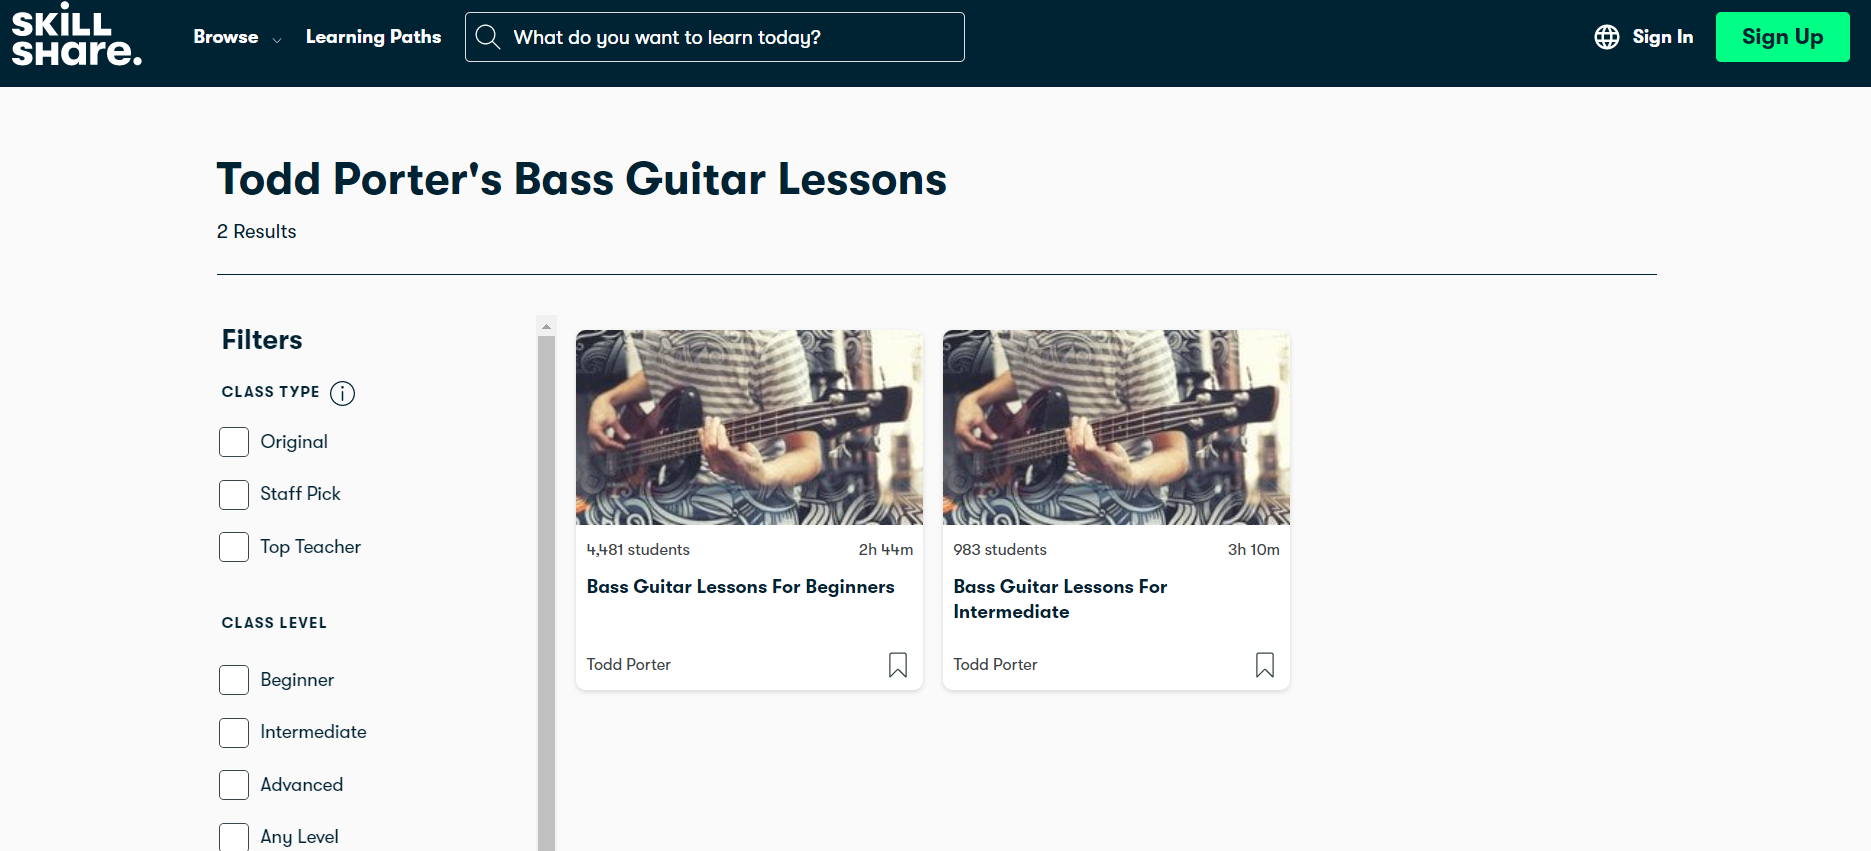 Todd Porter's Bass Guitar Lessons